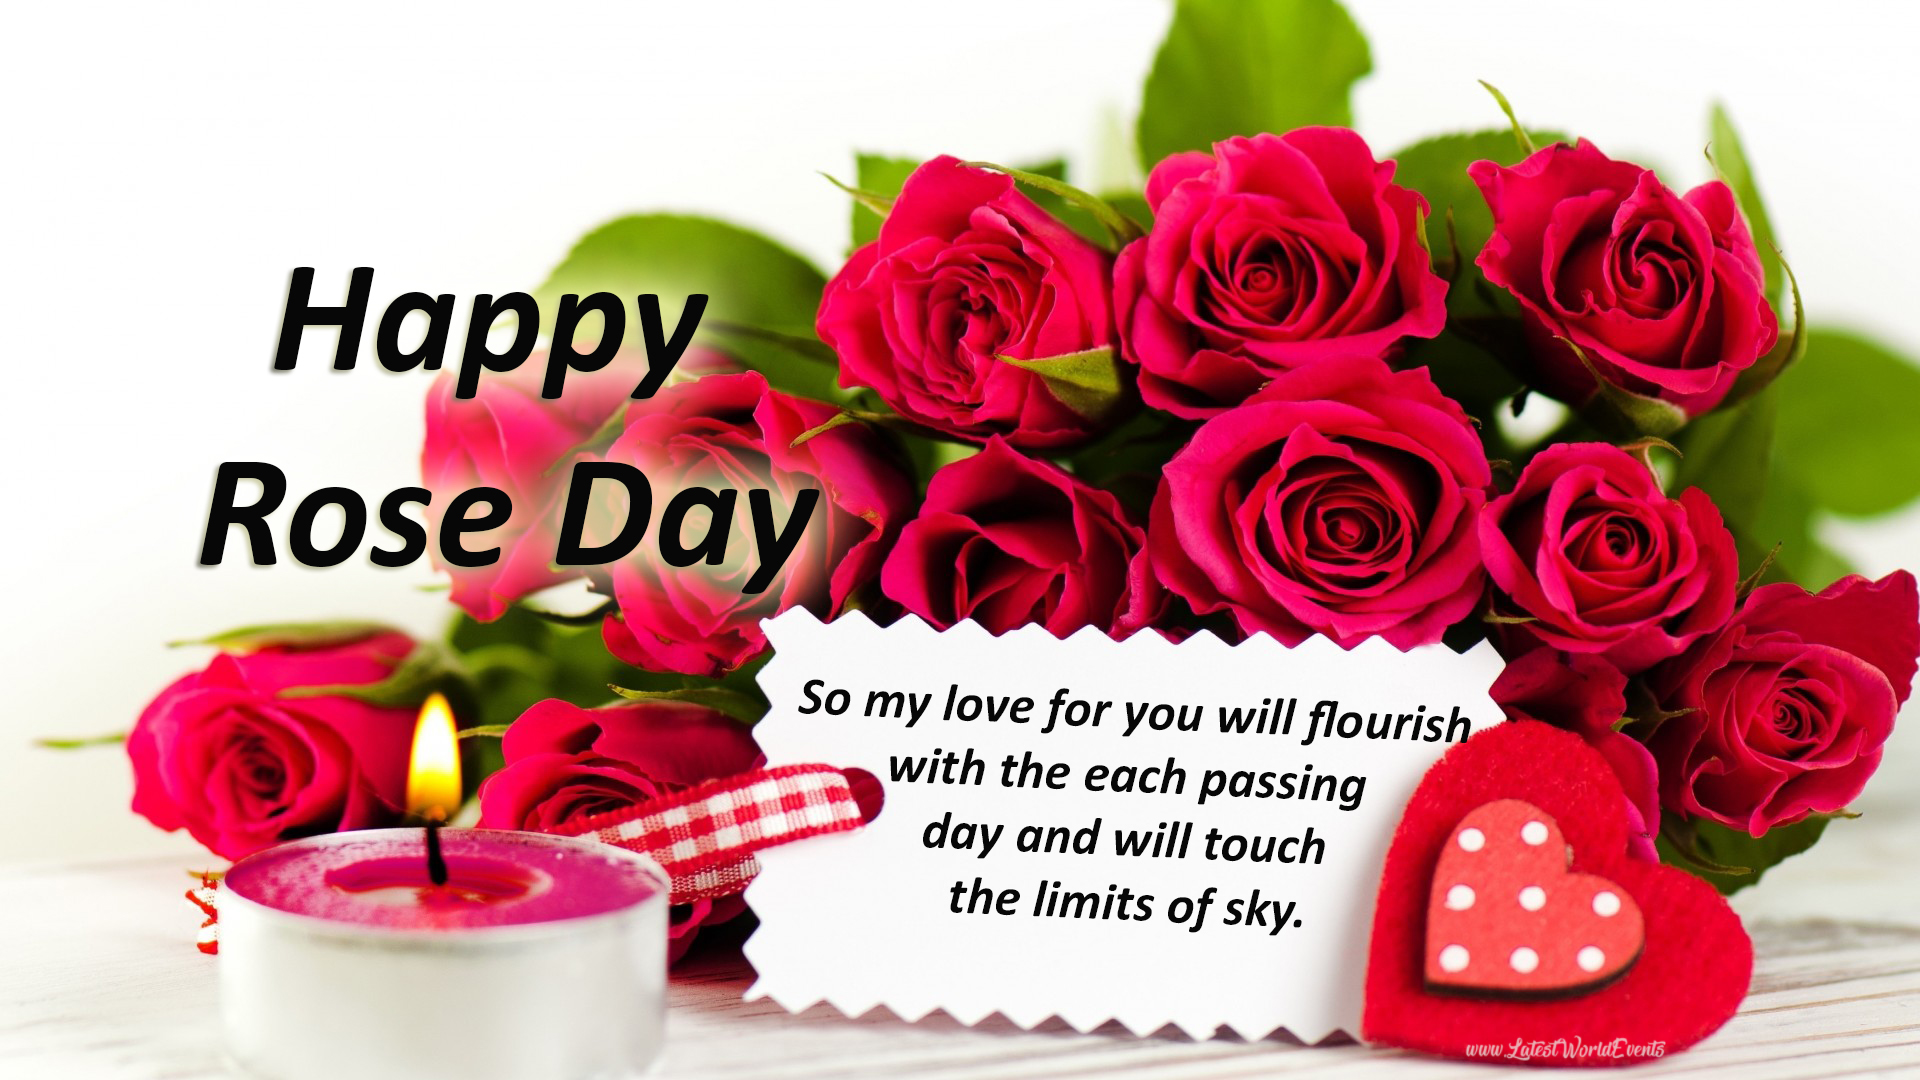 Download-rose-day-wishes-for-girlfriend-in-english